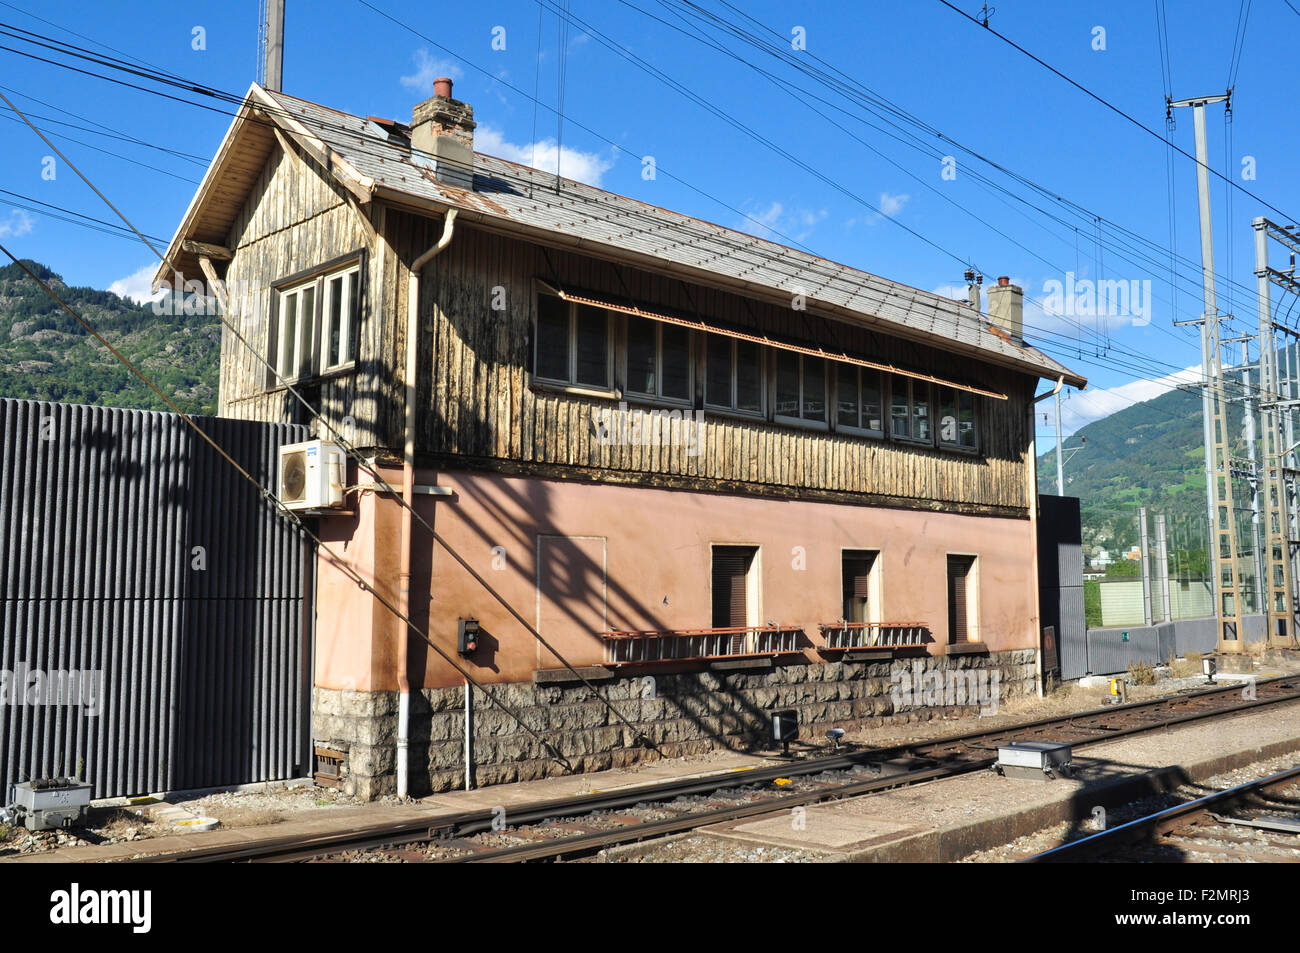 Old signal box at the west end of Brig station, Valais, Switzerland Stock Photo